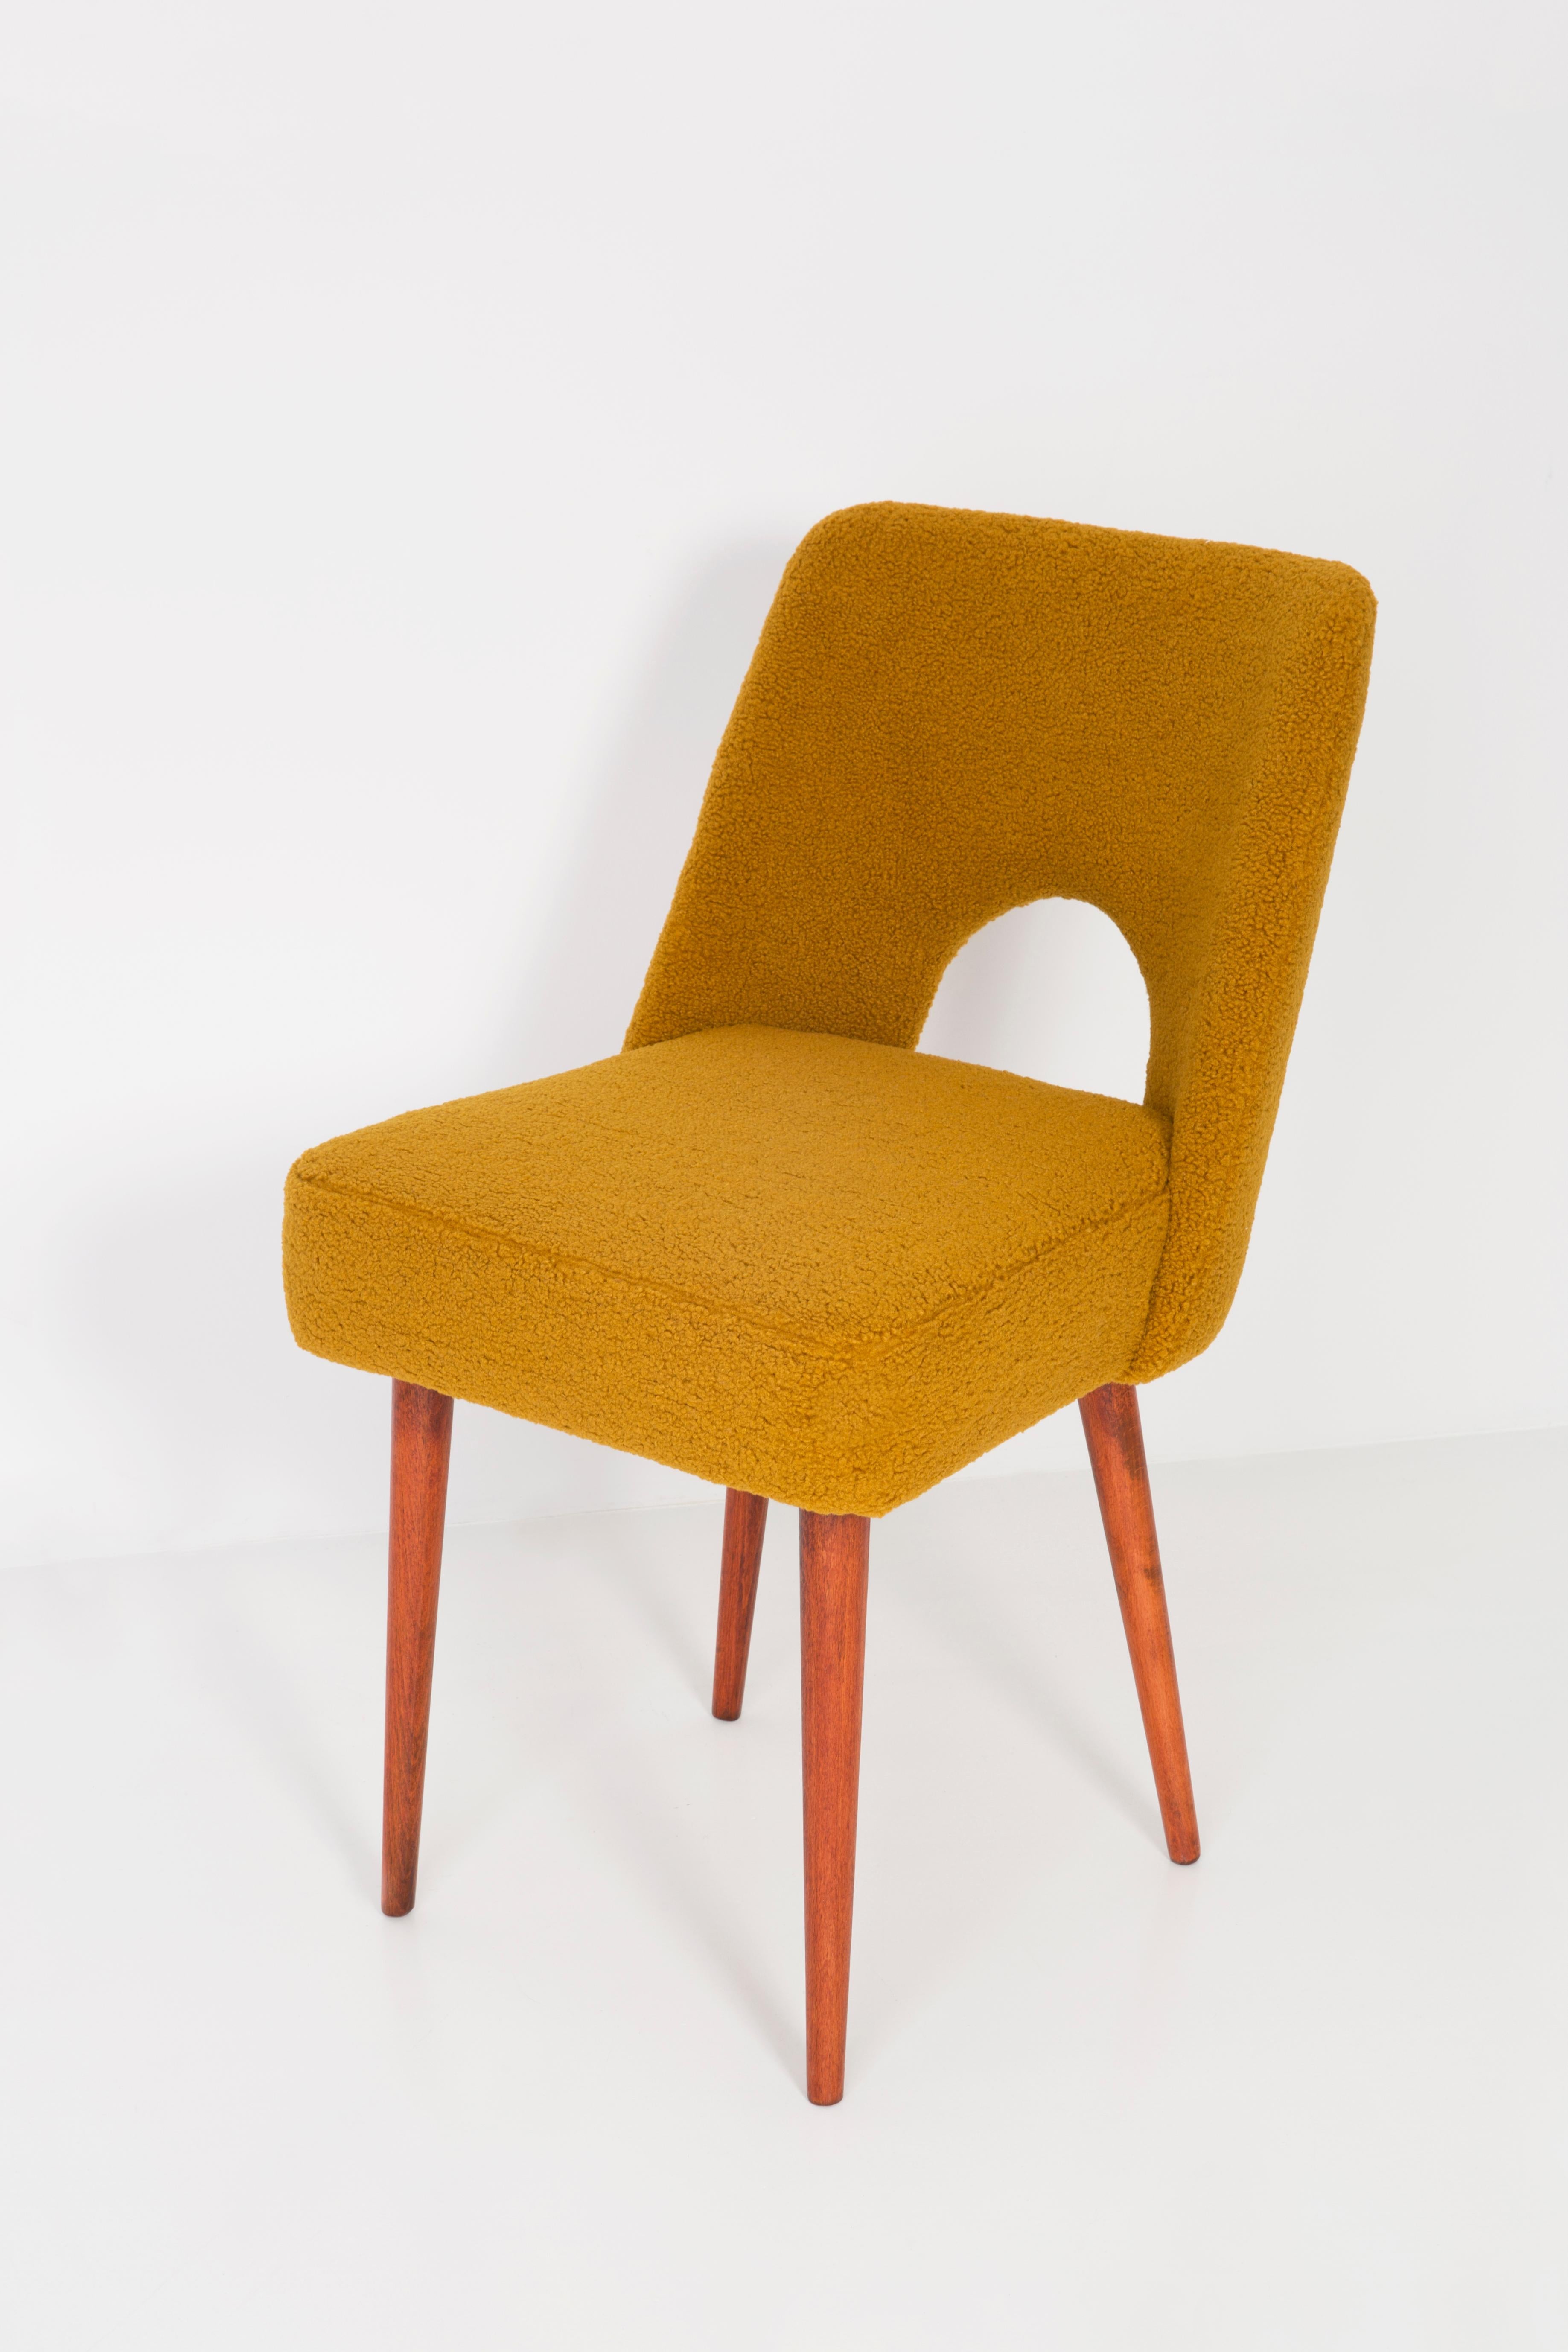 Set of Twelve Yellow Ochre Boucle 'Shell' Chairs, 1960s For Sale 1